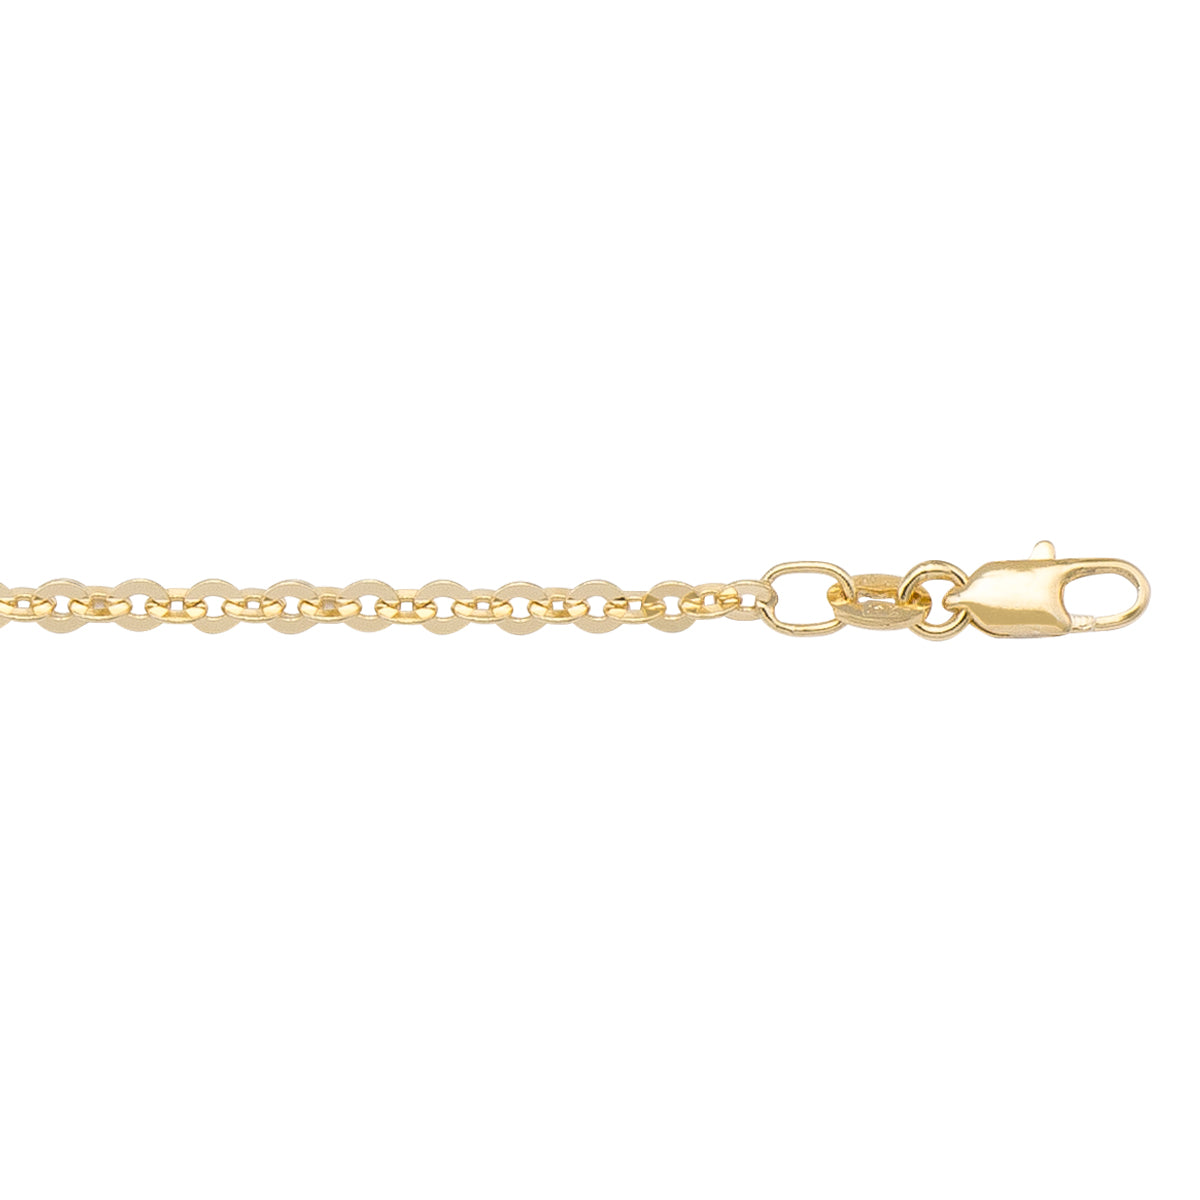 YELLOW GOLD SOLID CABLE LINK CHAIN